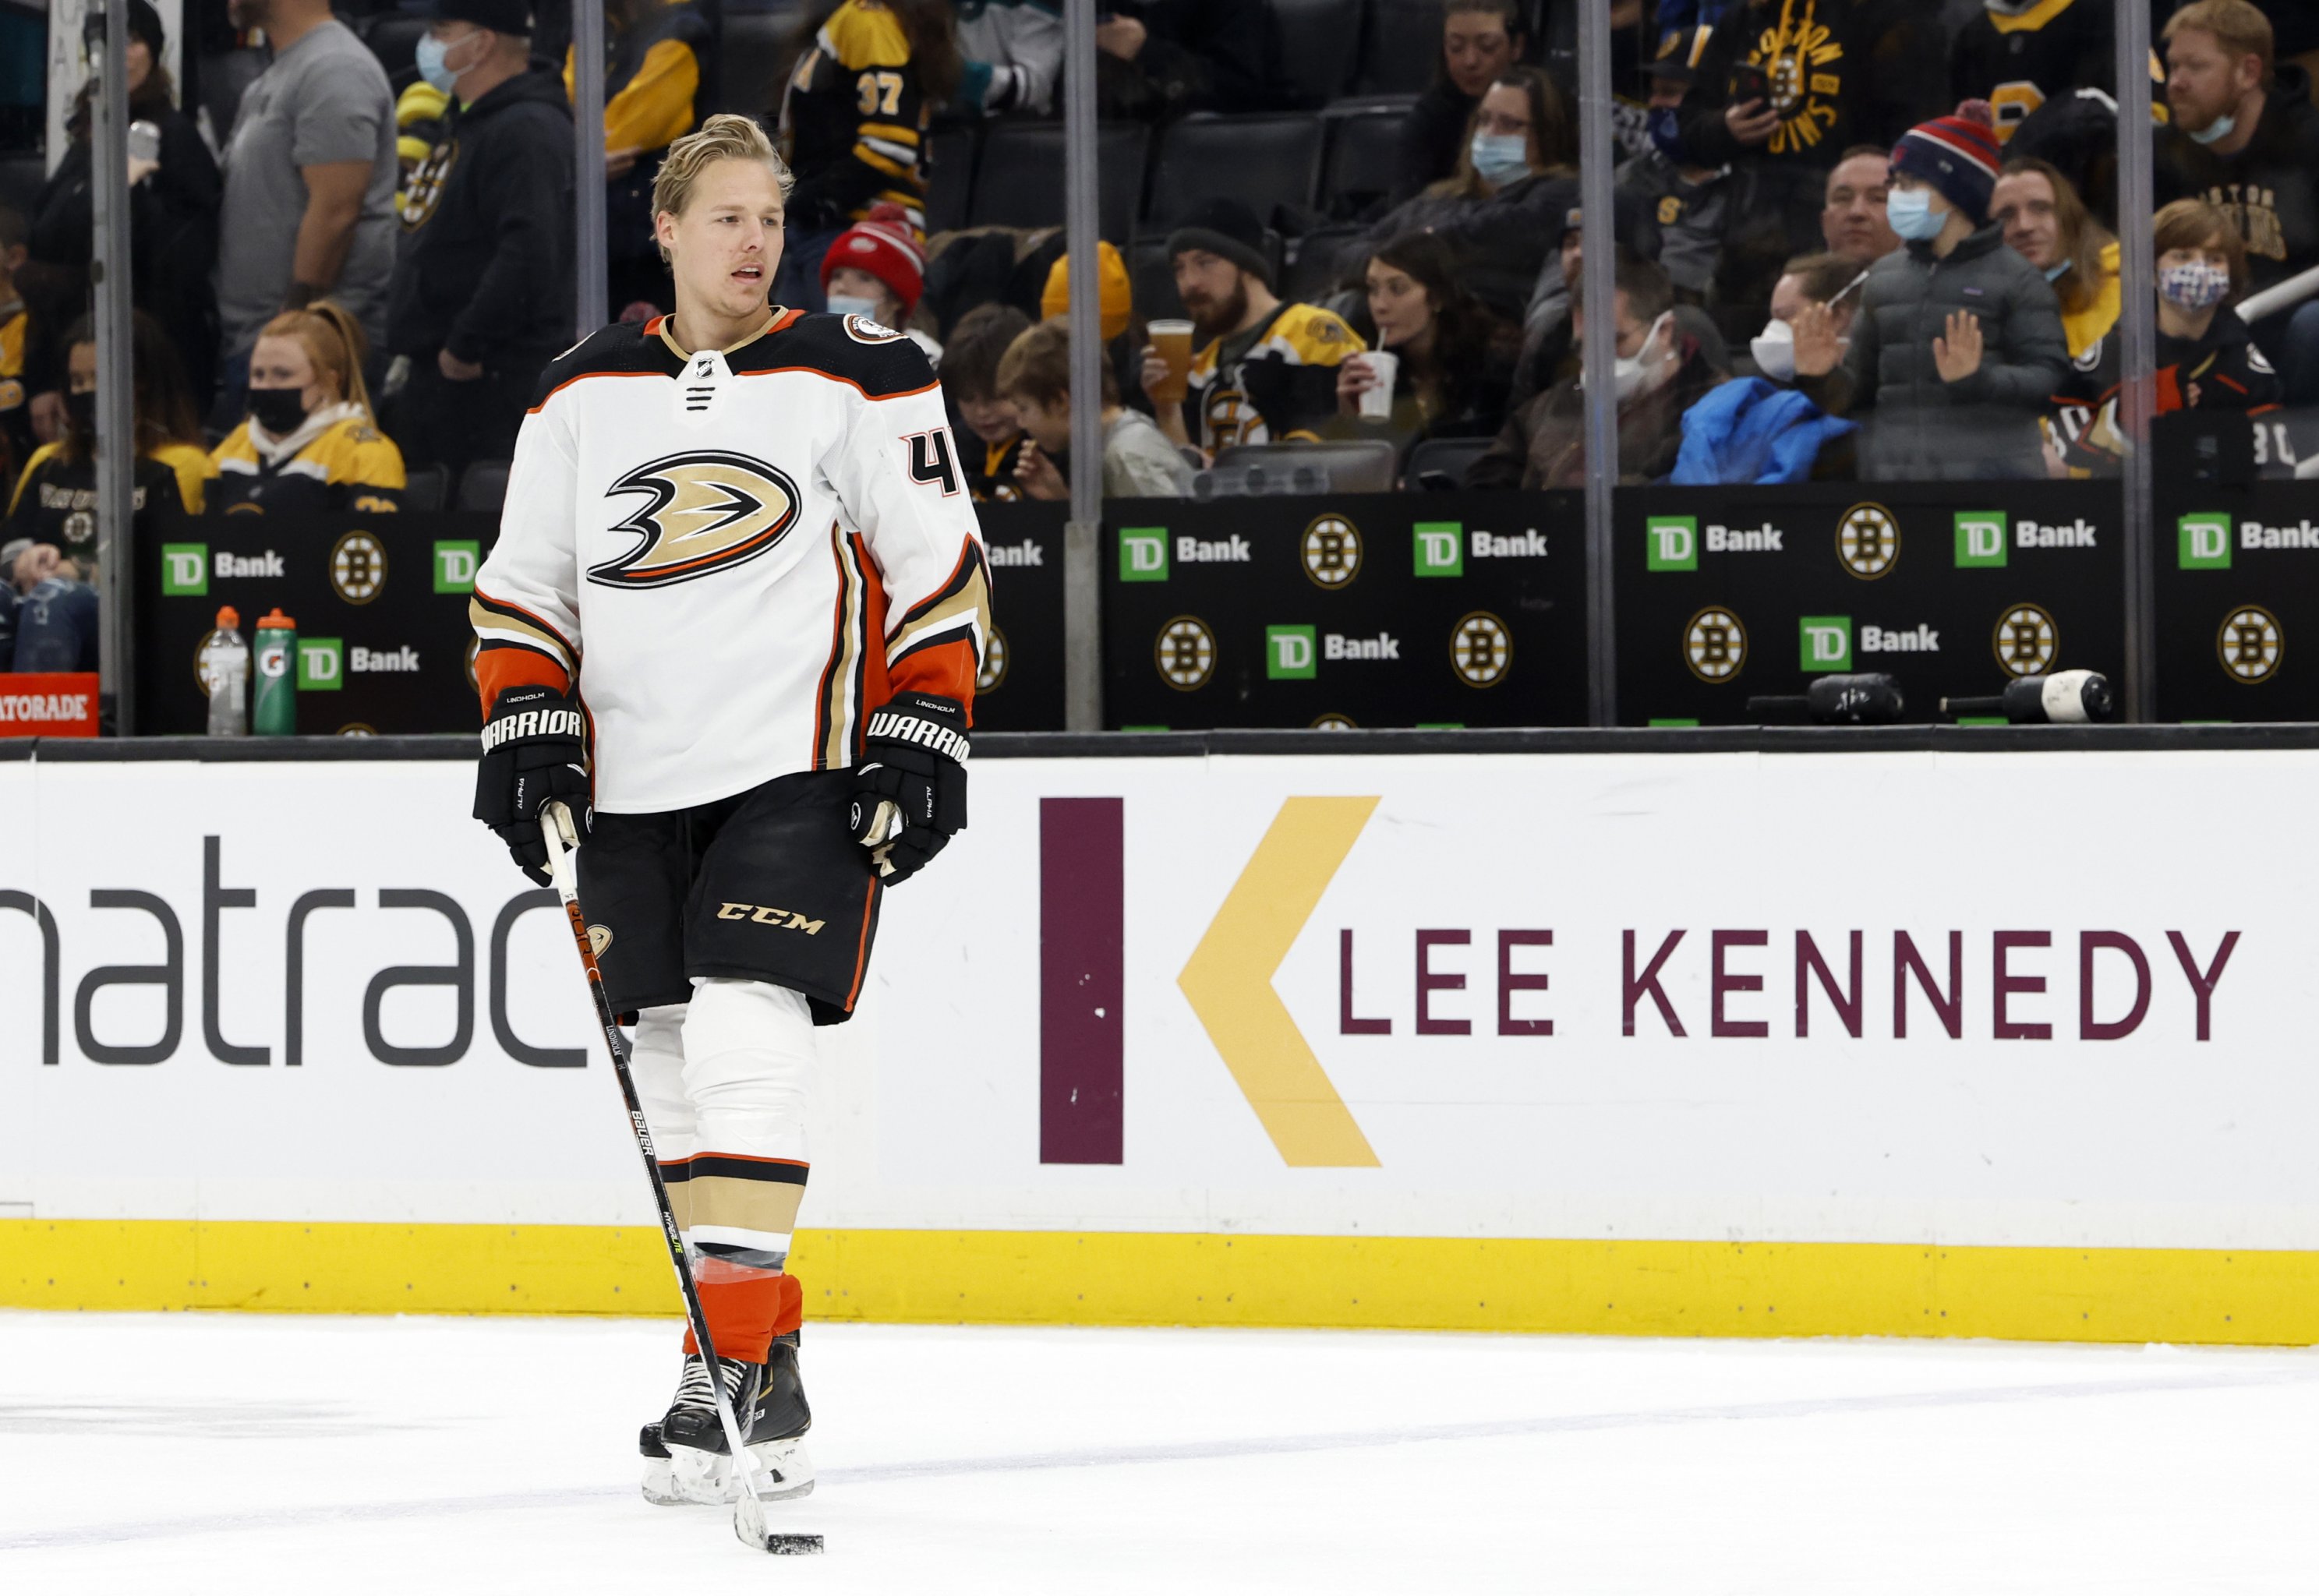 Hampus Lindholm introduces cute new Ducks fan to world